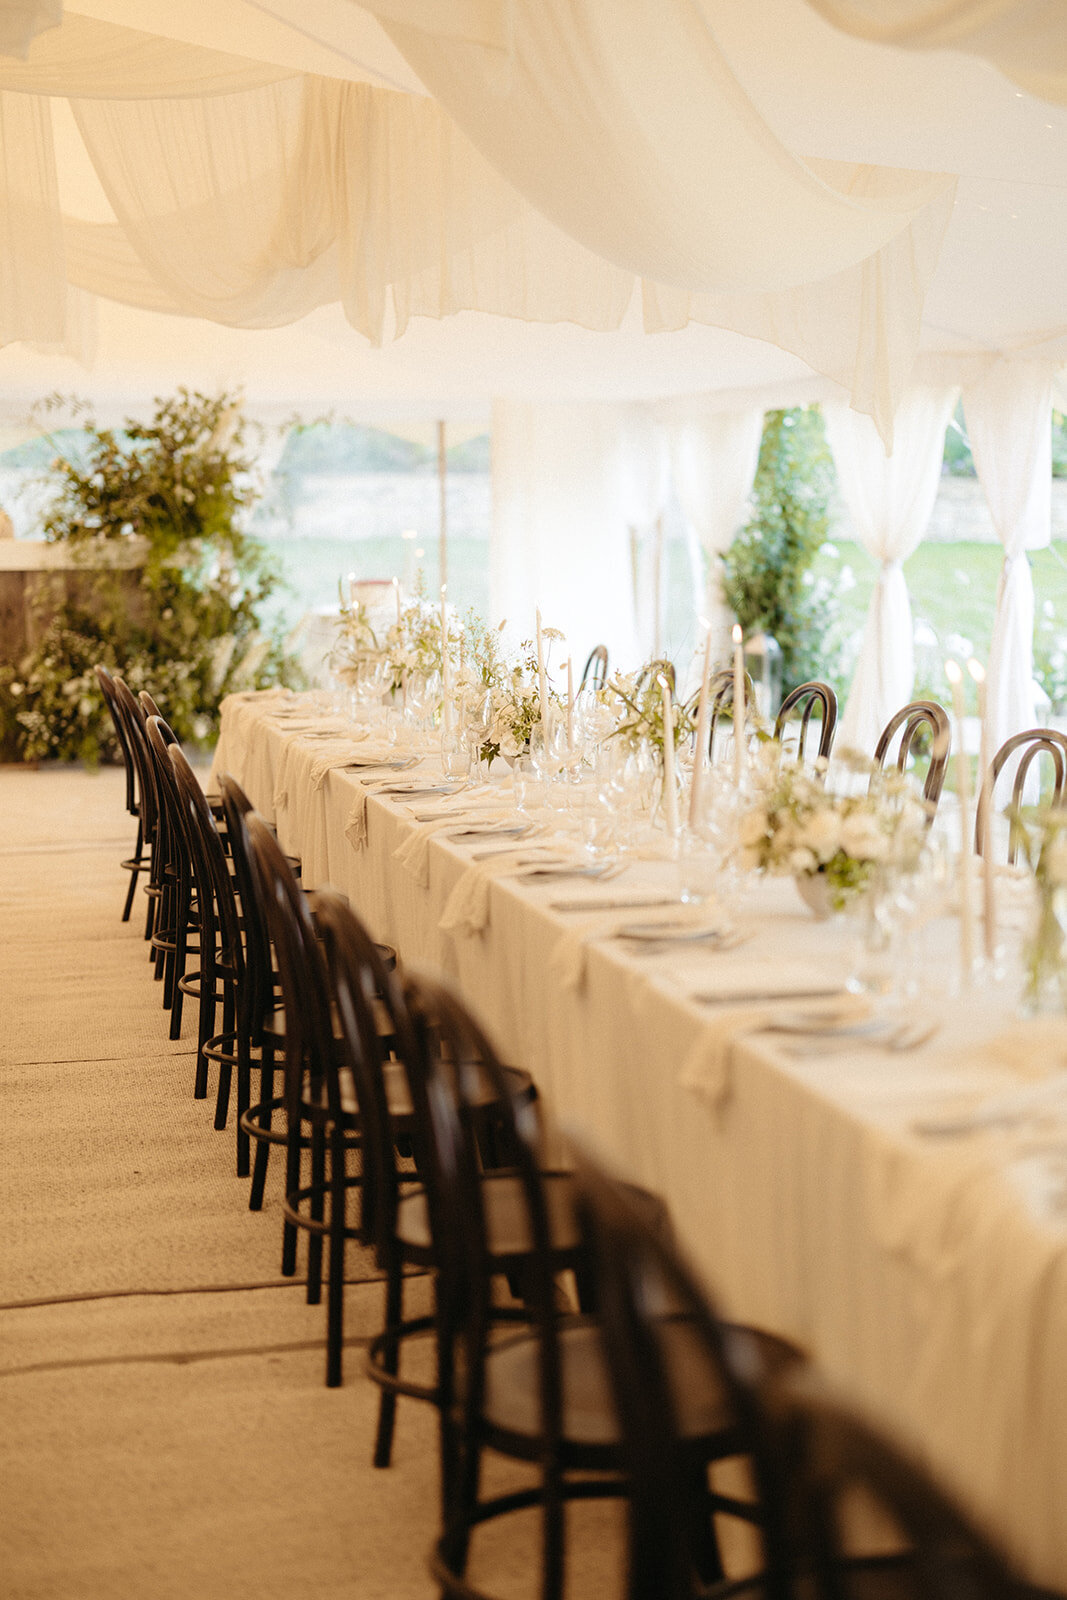 Attabara Studio UK Luxury Wedding Planners Private Estate Marquee Wedding with Rebecca Rees 0285